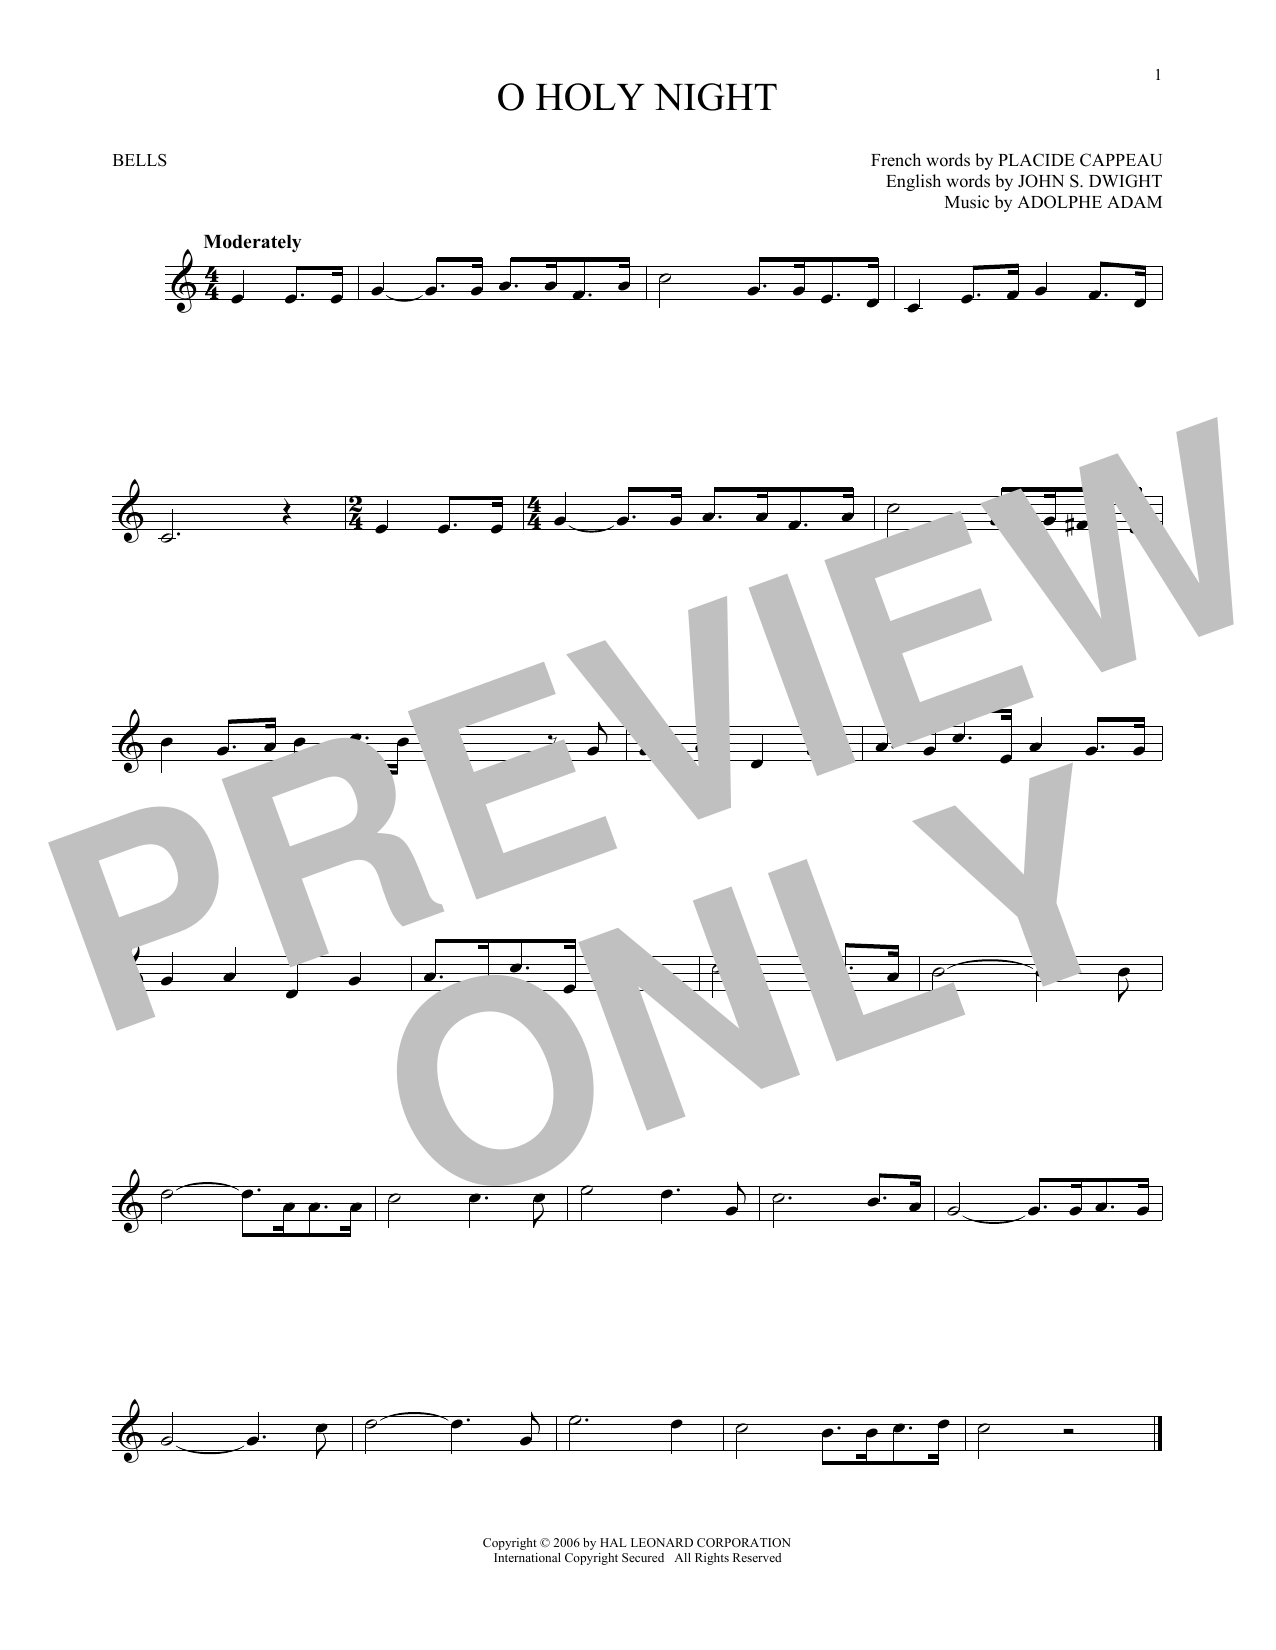 Adolphe Adam O Holy Night sheet music notes and chords. Download Printable PDF.